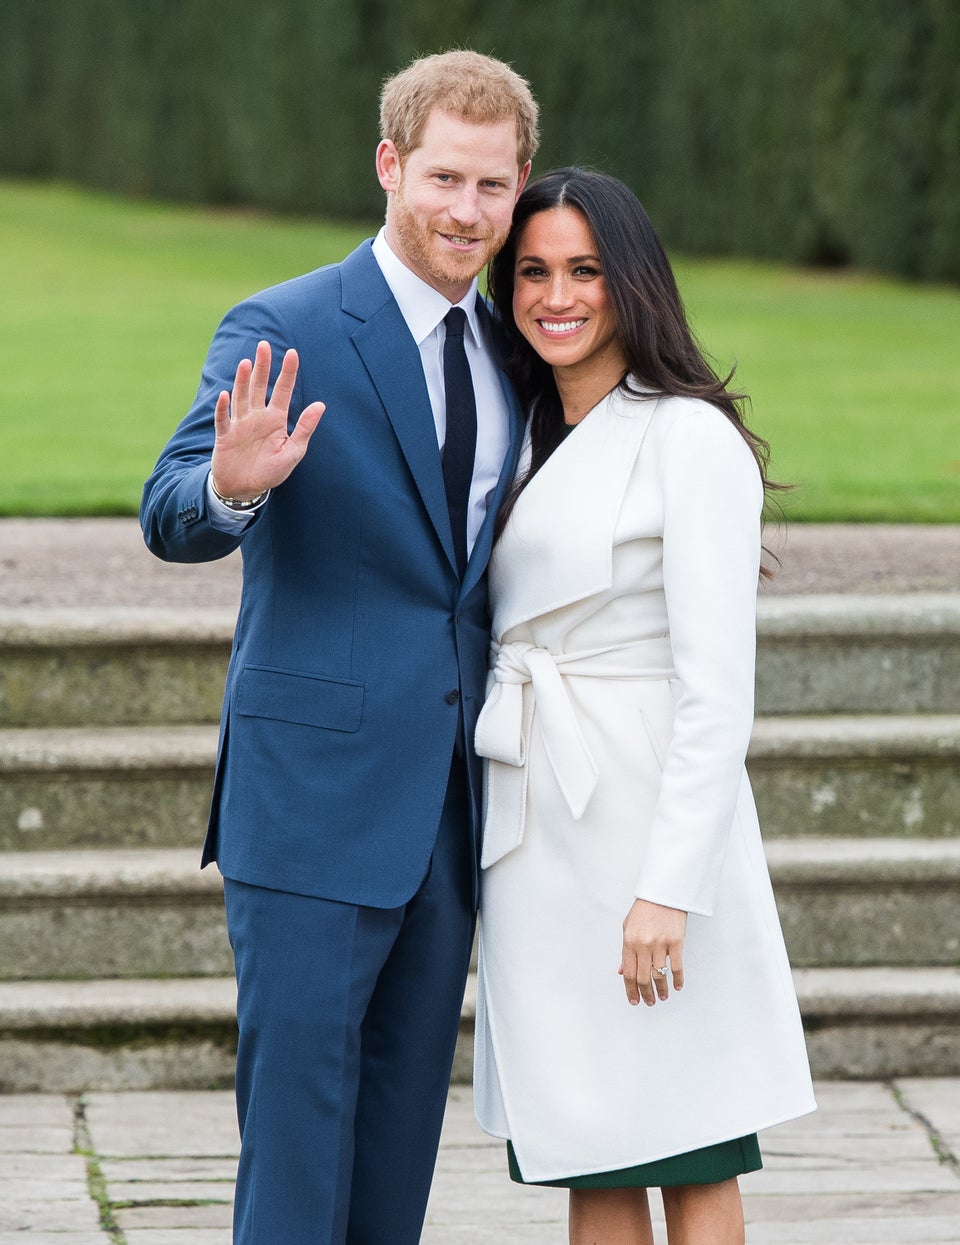 Black Twitter Wants An Invite To Prince Harry And Meghan Markle’s Royal Wedding